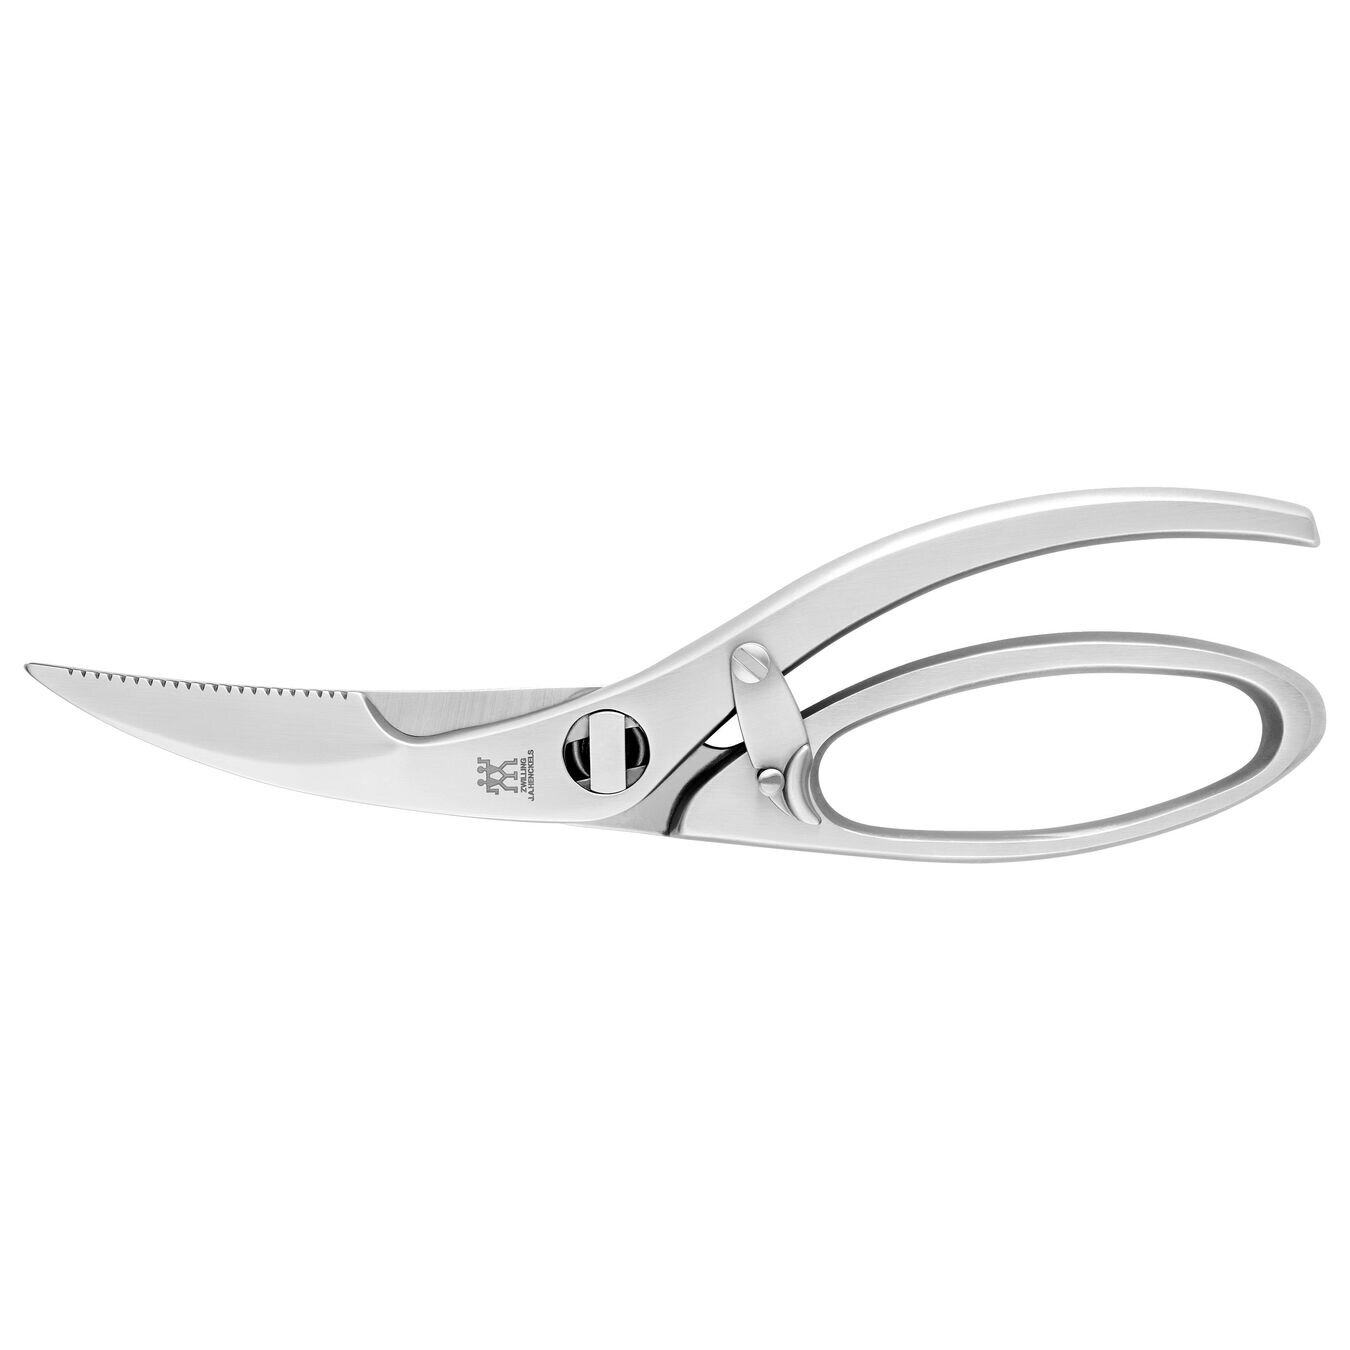 BergHOFF Ron Acapu Poultry Shears